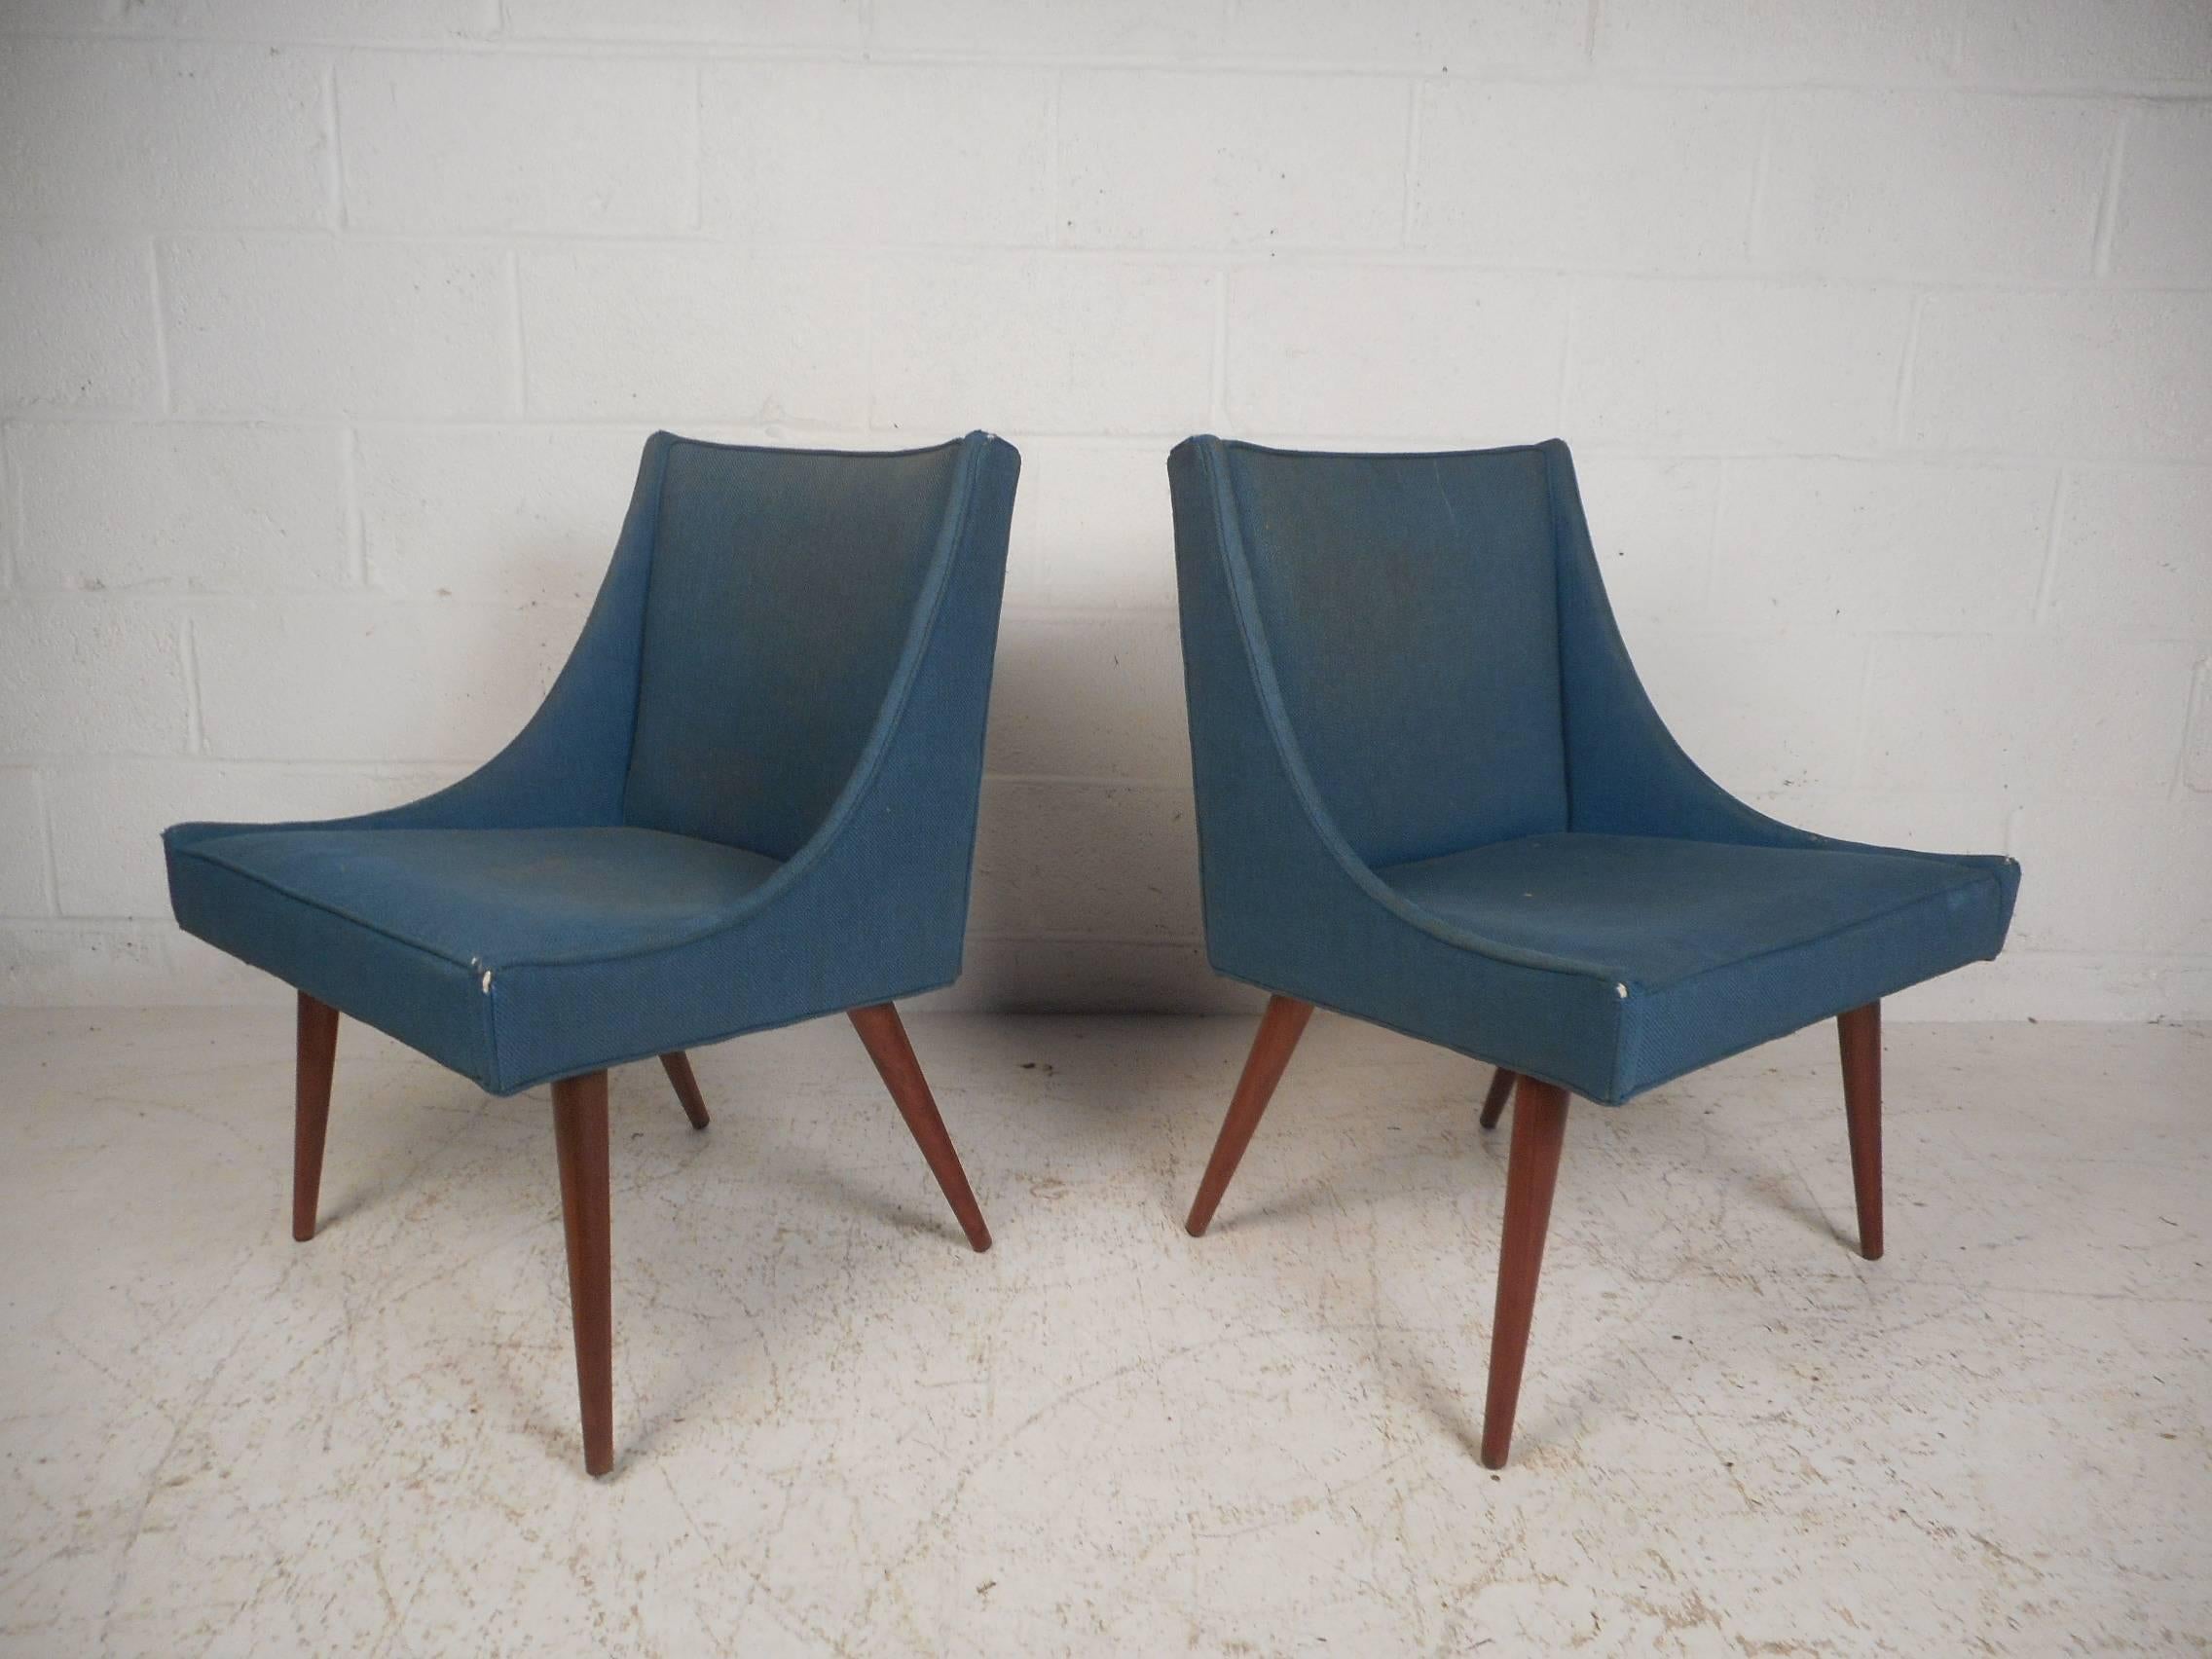 This gorgeous pair of vintage modern lounge chairs feature splayed walnut legs. A slipper style design covered in a vintage blue fabric ensures plenty of comfort without sacrificing style. This unique pair of chairs make the perfect addition to any